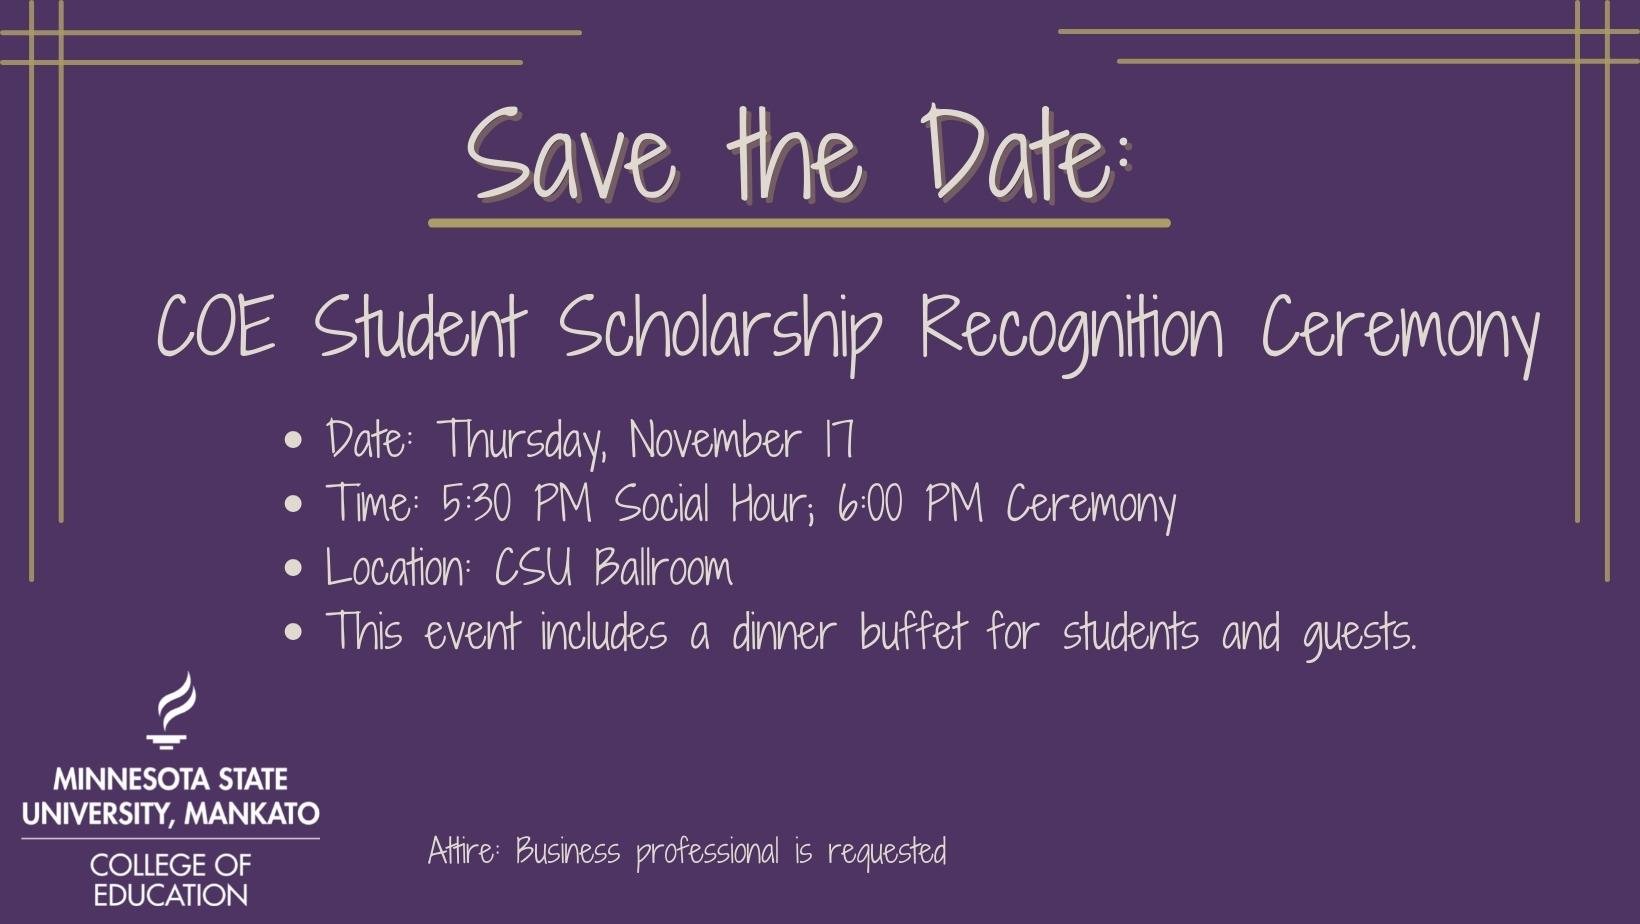 Copy of Scholarship_Save the Date_FB.jpg